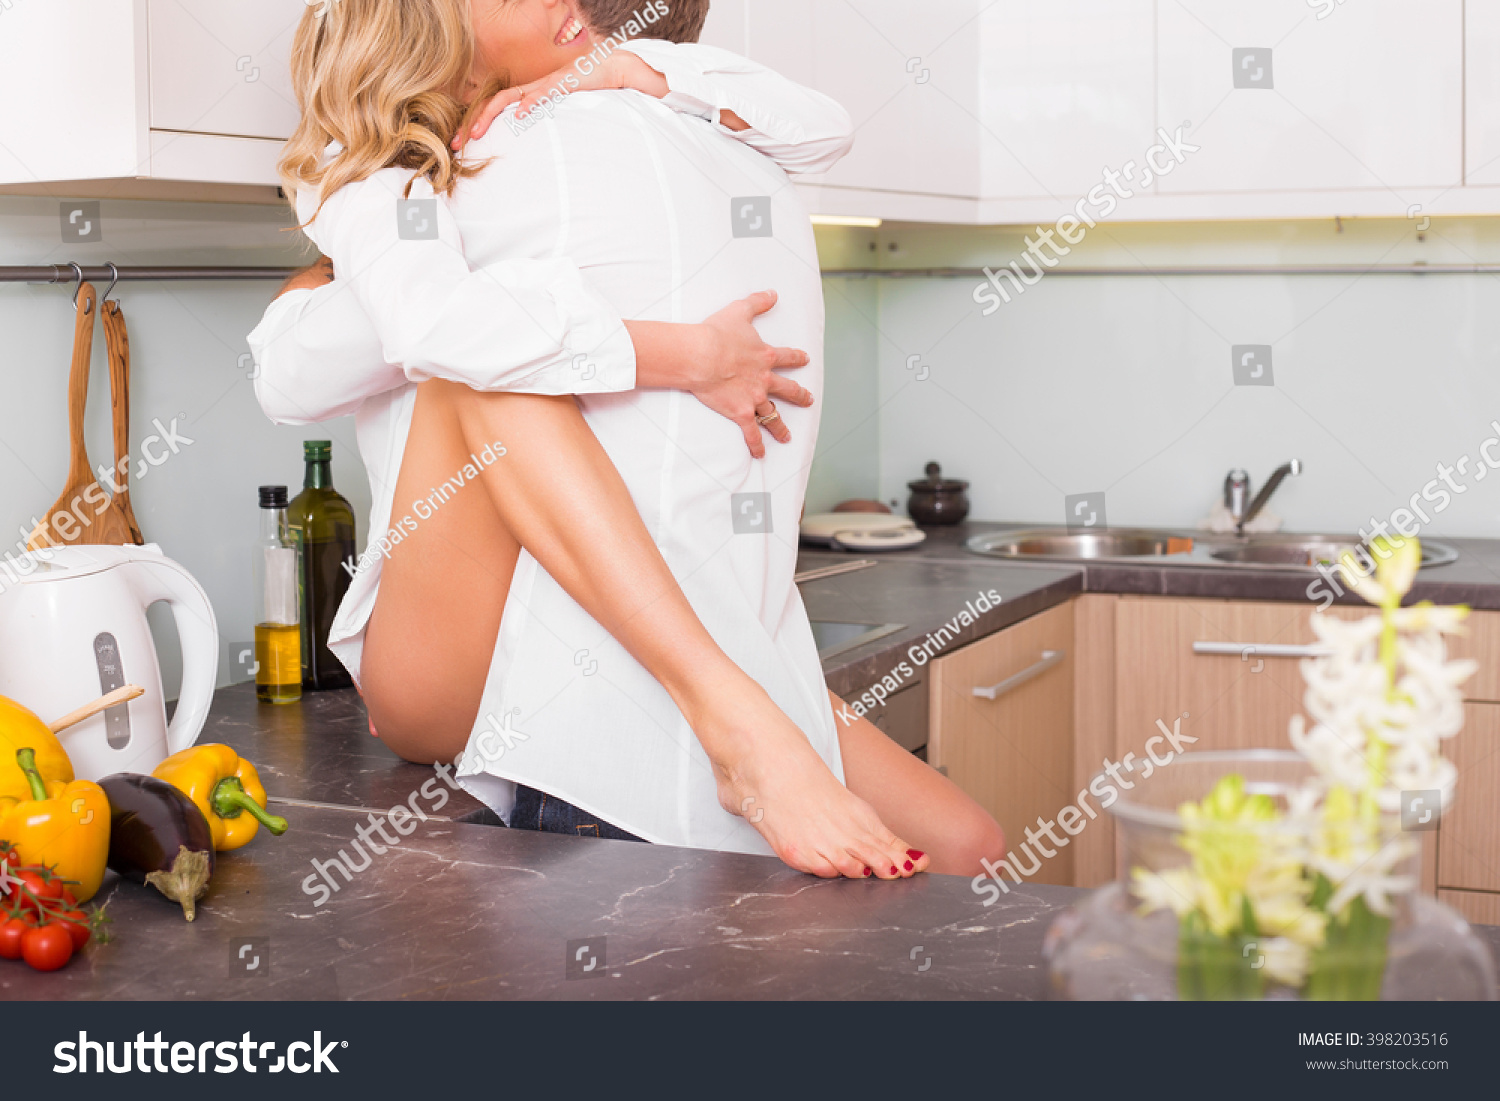 Sex On Counter 45